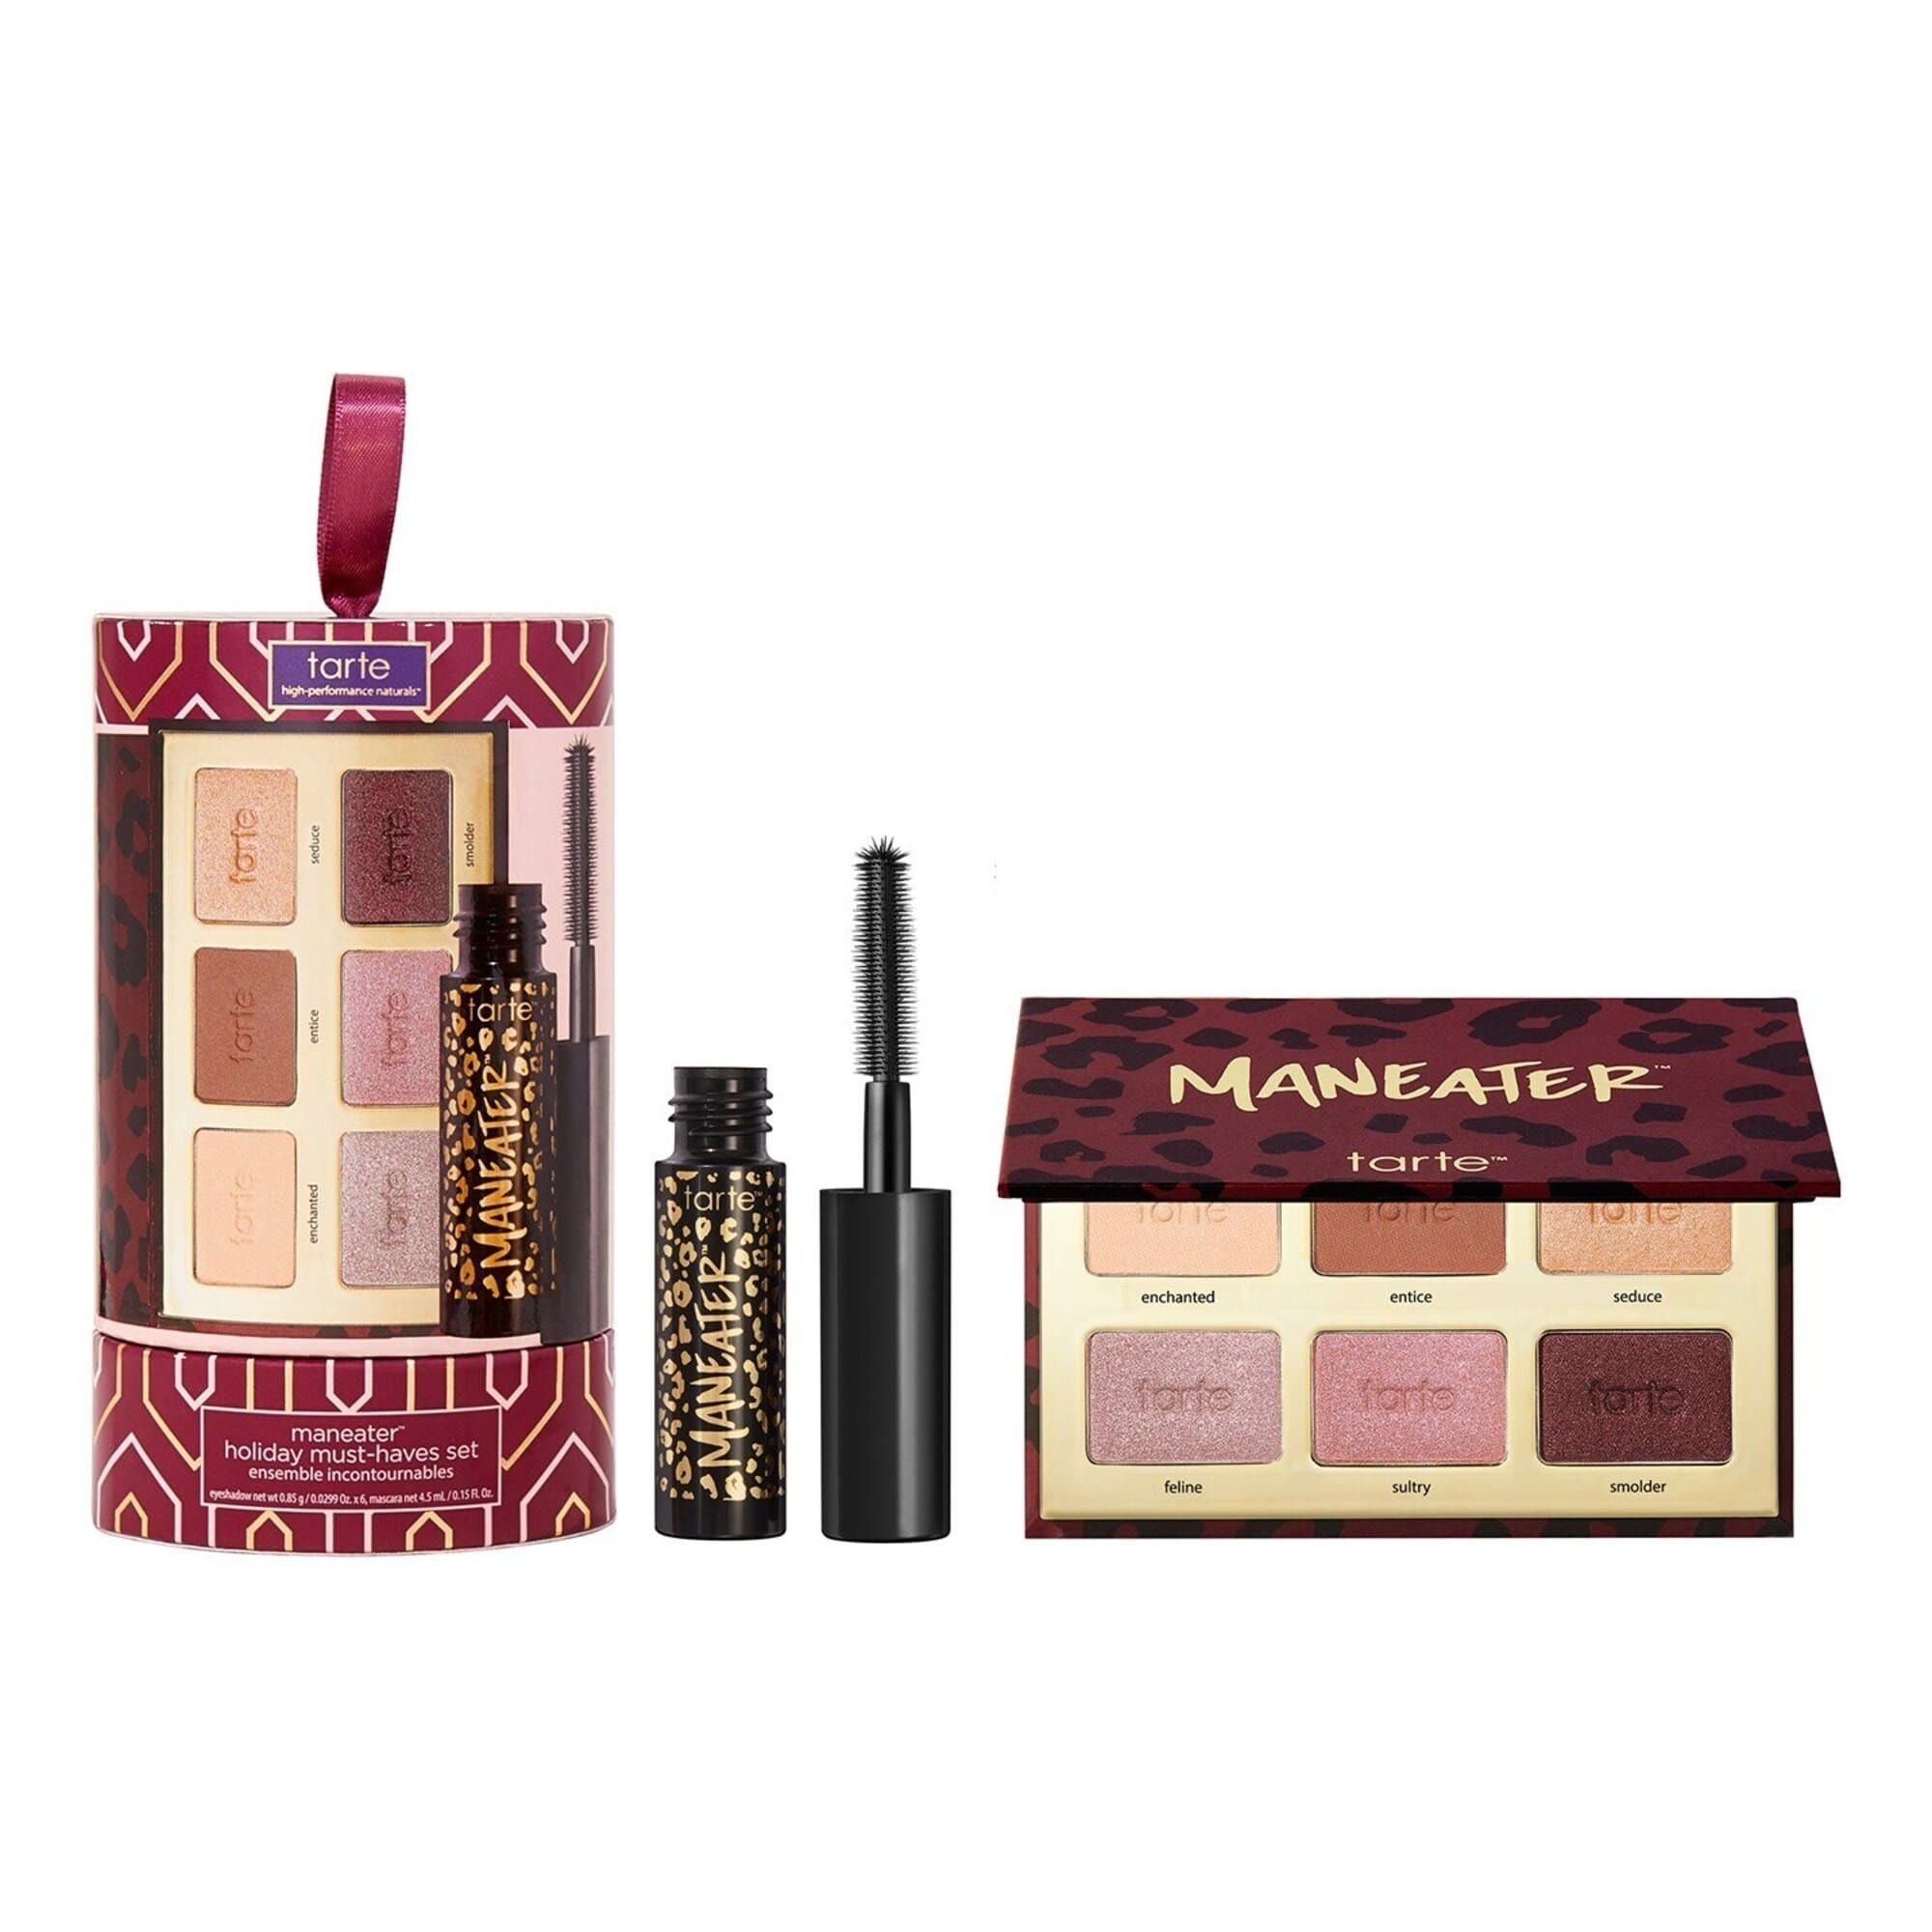 Tarte Festifs Maneater Holiday Must-Haves Set